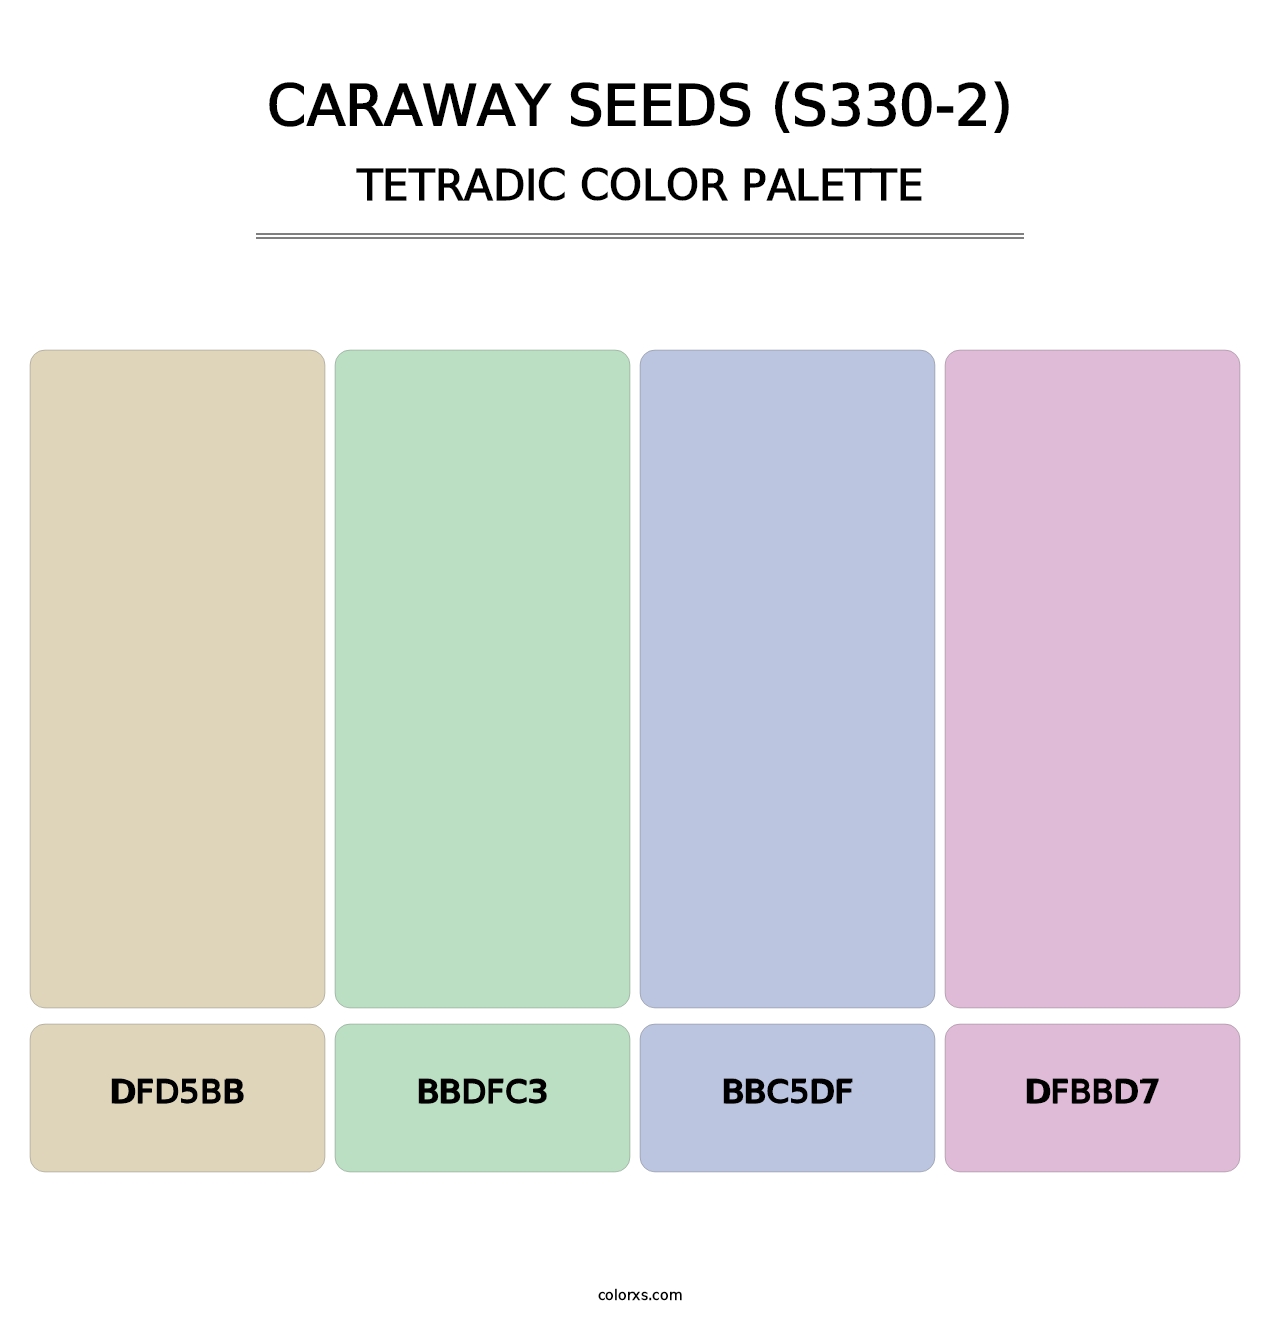 Caraway Seeds (S330-2) - Tetradic Color Palette